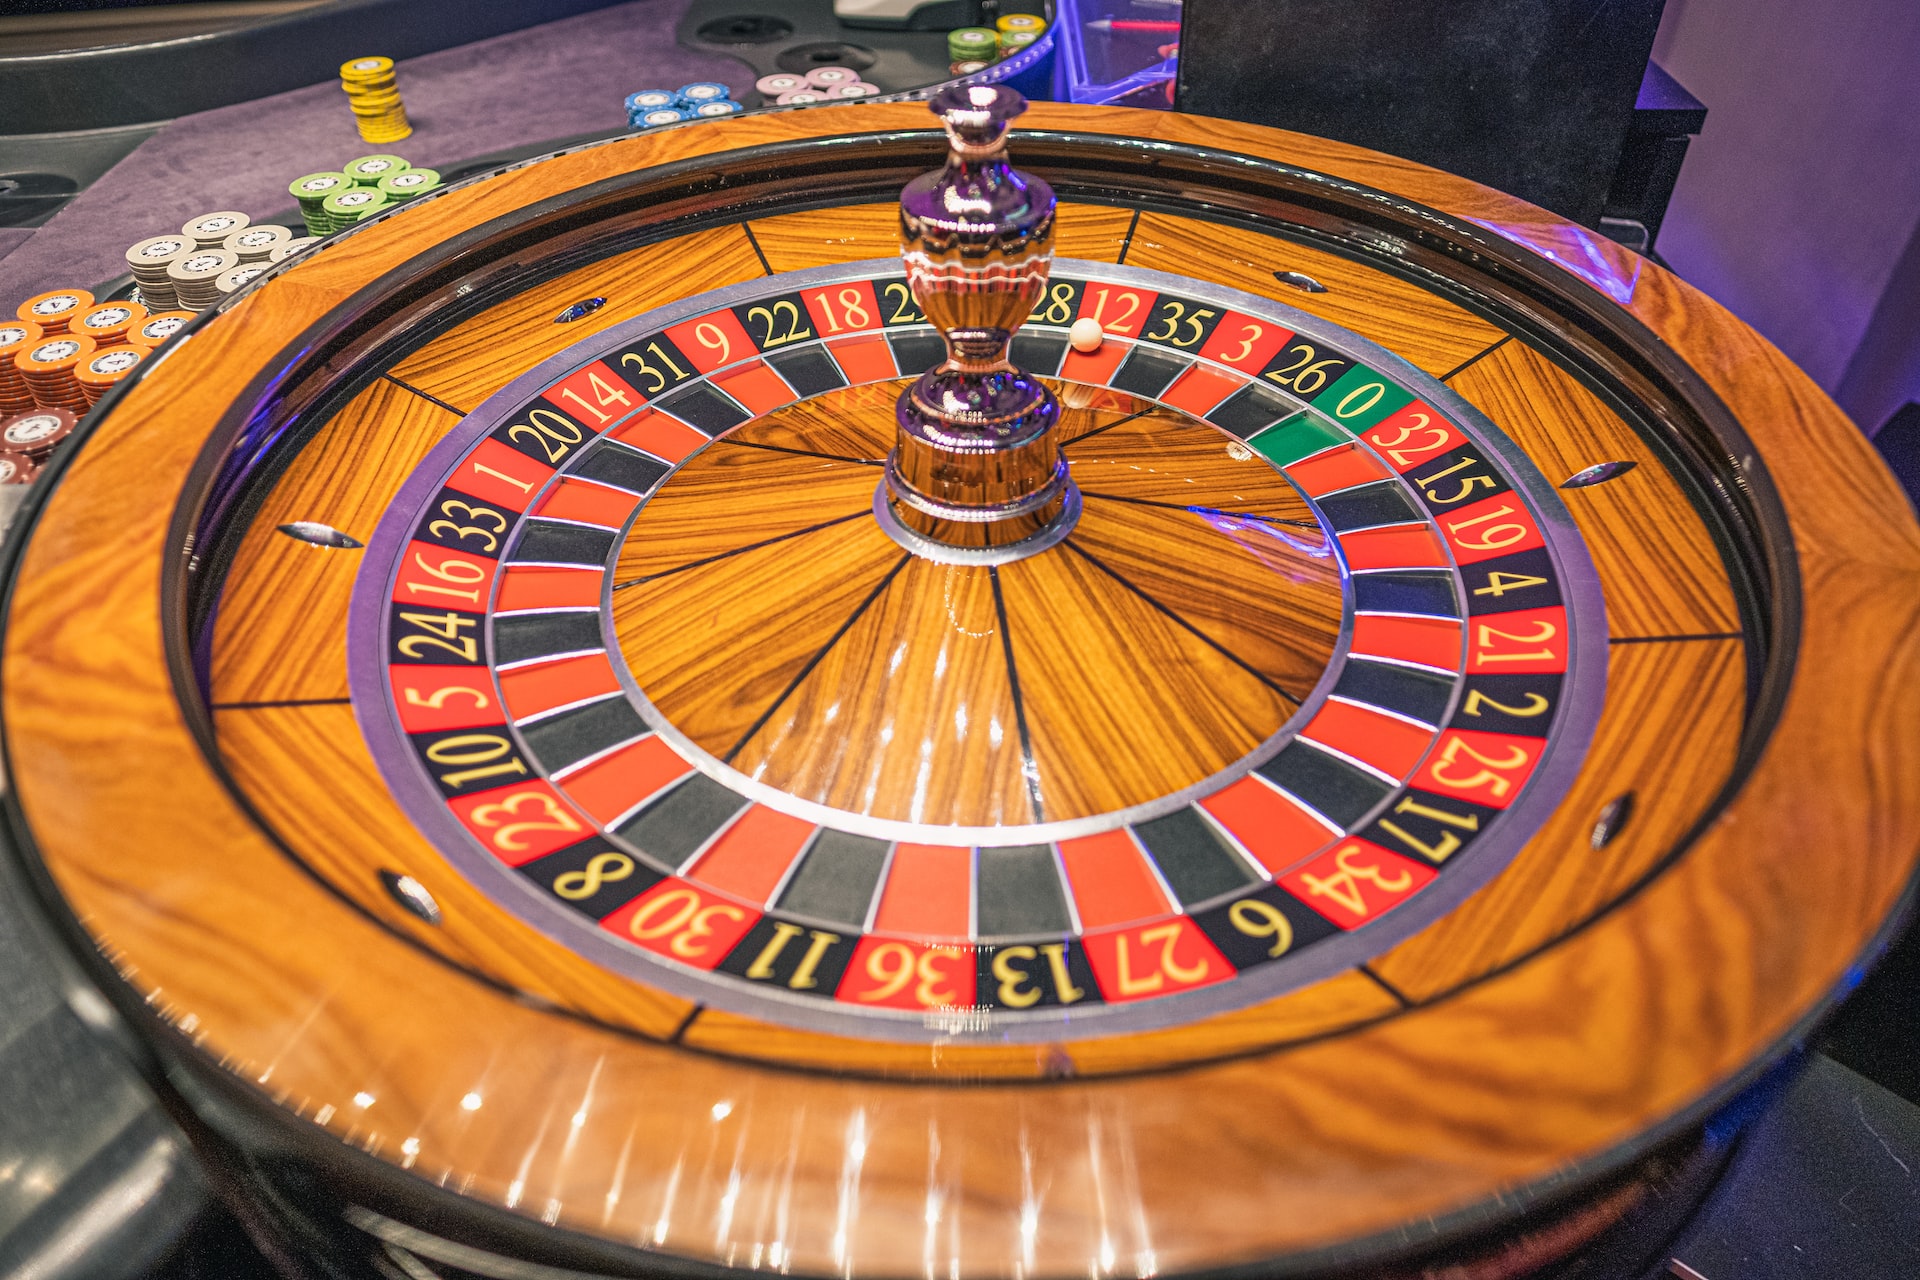 A wooden roulette table with lots of casino chips beside it